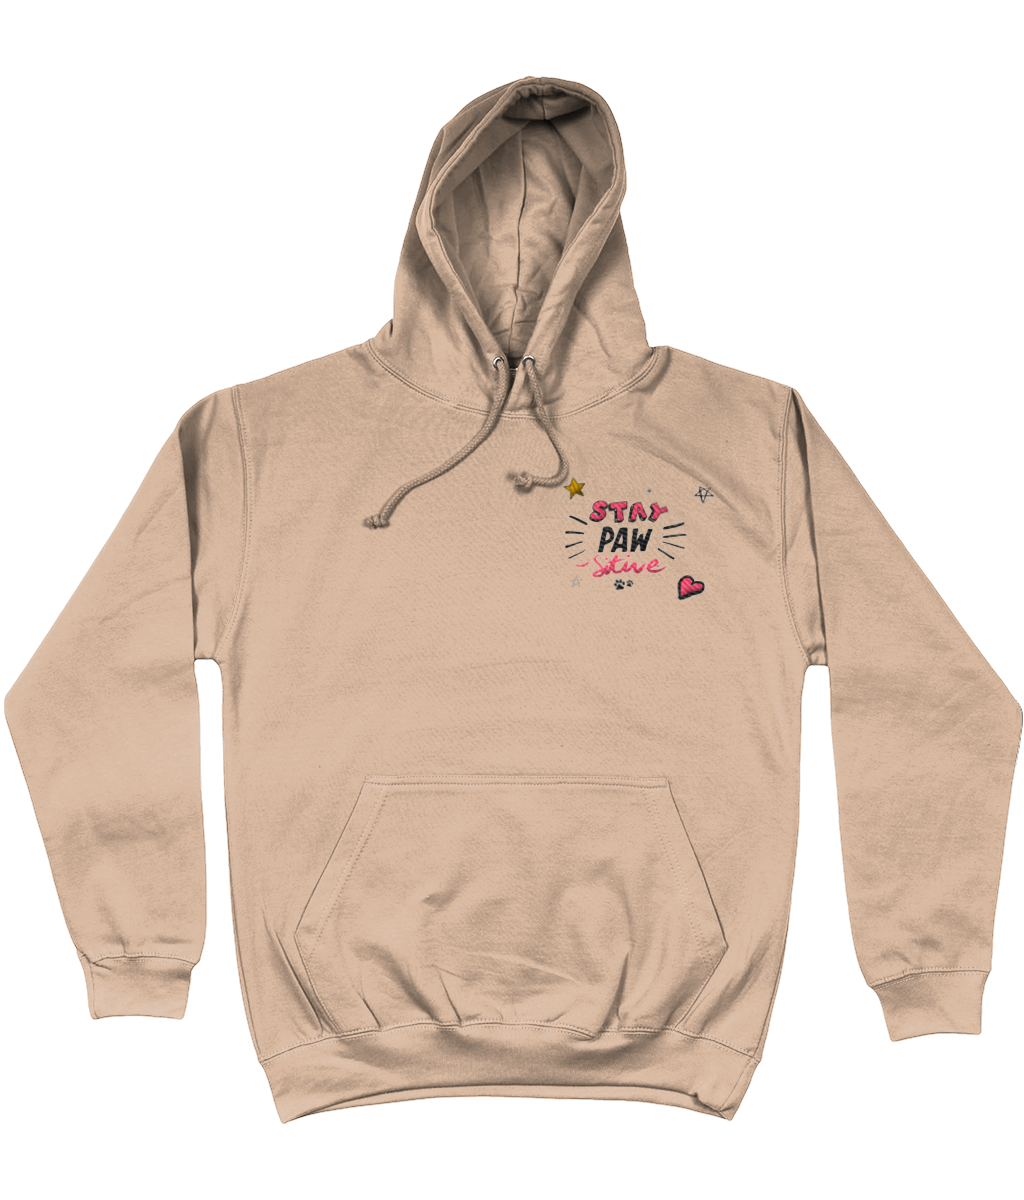 stay paw-sitive embroidered hoodie